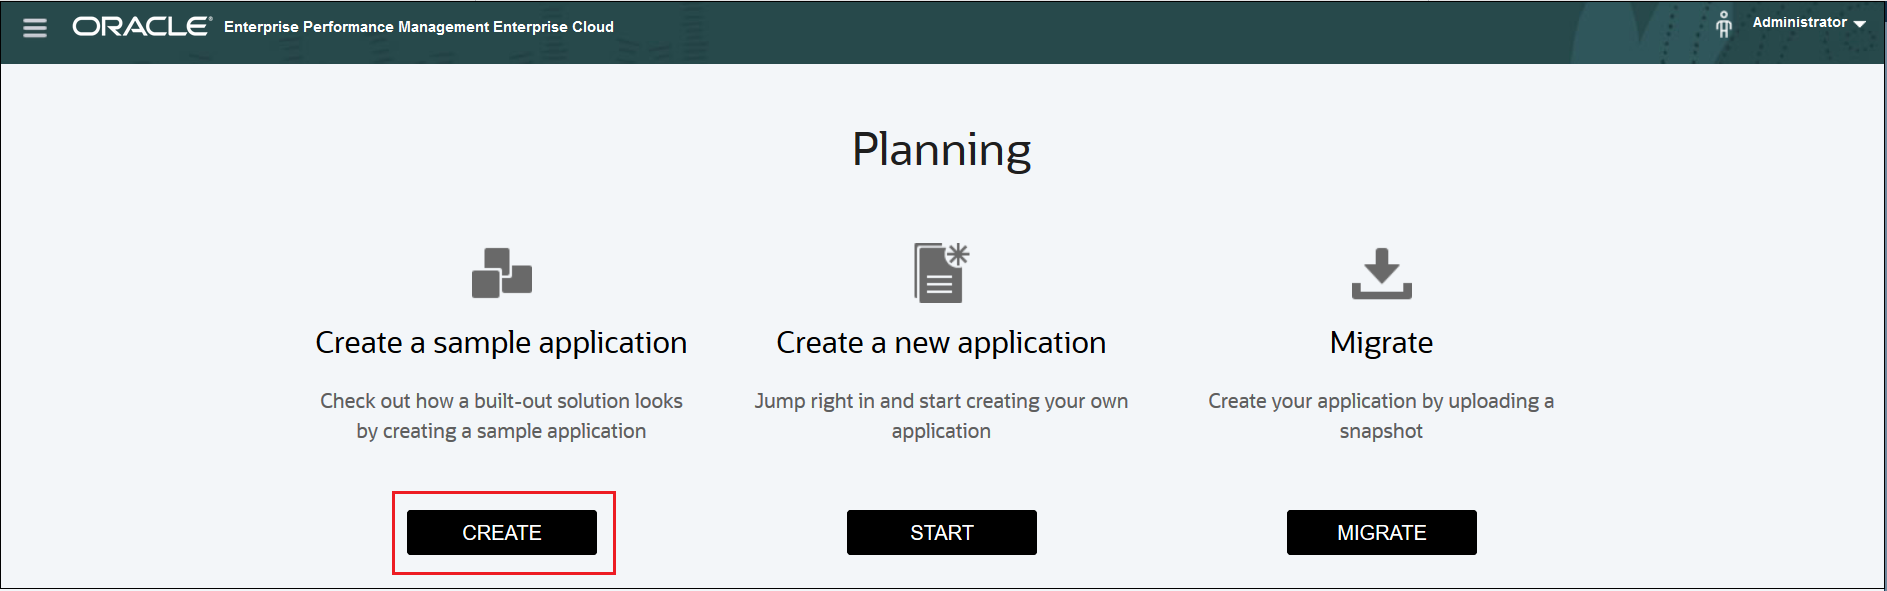 Planning screen with Create a Sample Application selected